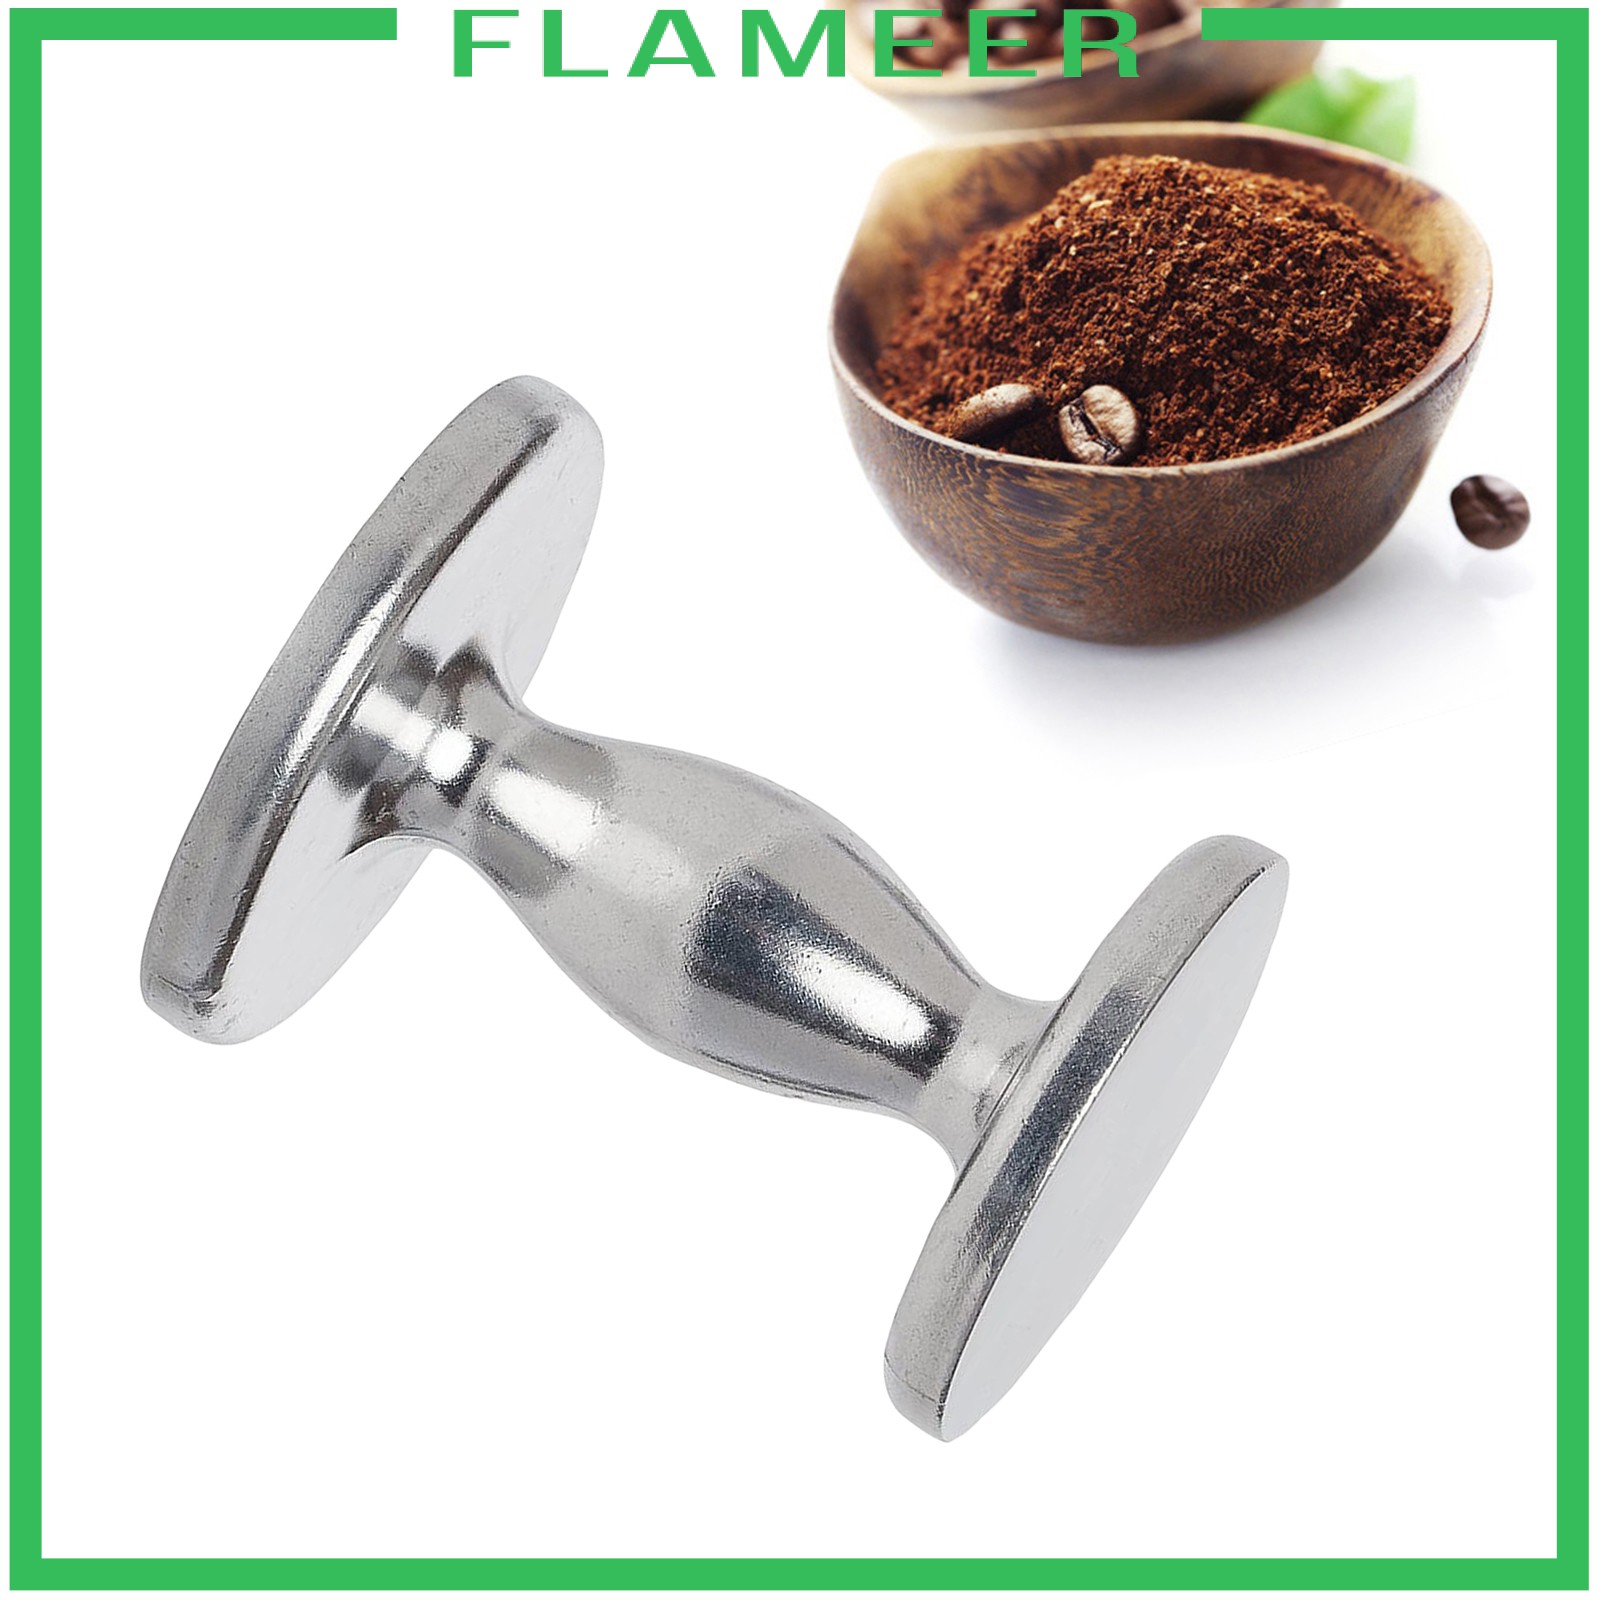 [FLAMEER] Stainless Steel Dual Sided Espresso Tamper 51mm / 58mm